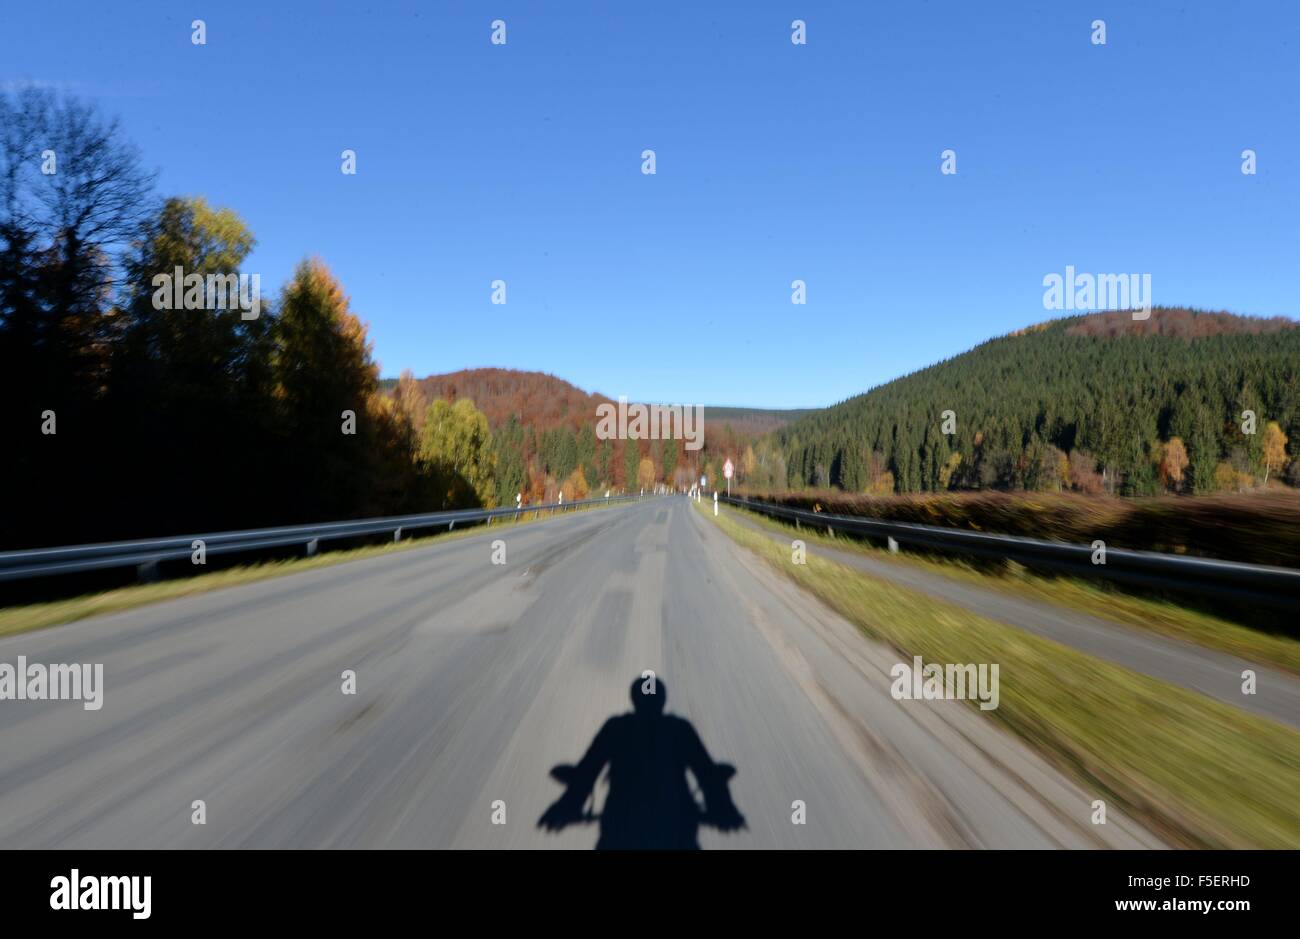 Motorcycle driver in autum, Germany, near city of Braunlage 2. November 2015. Photo: Frank May Stock Photo